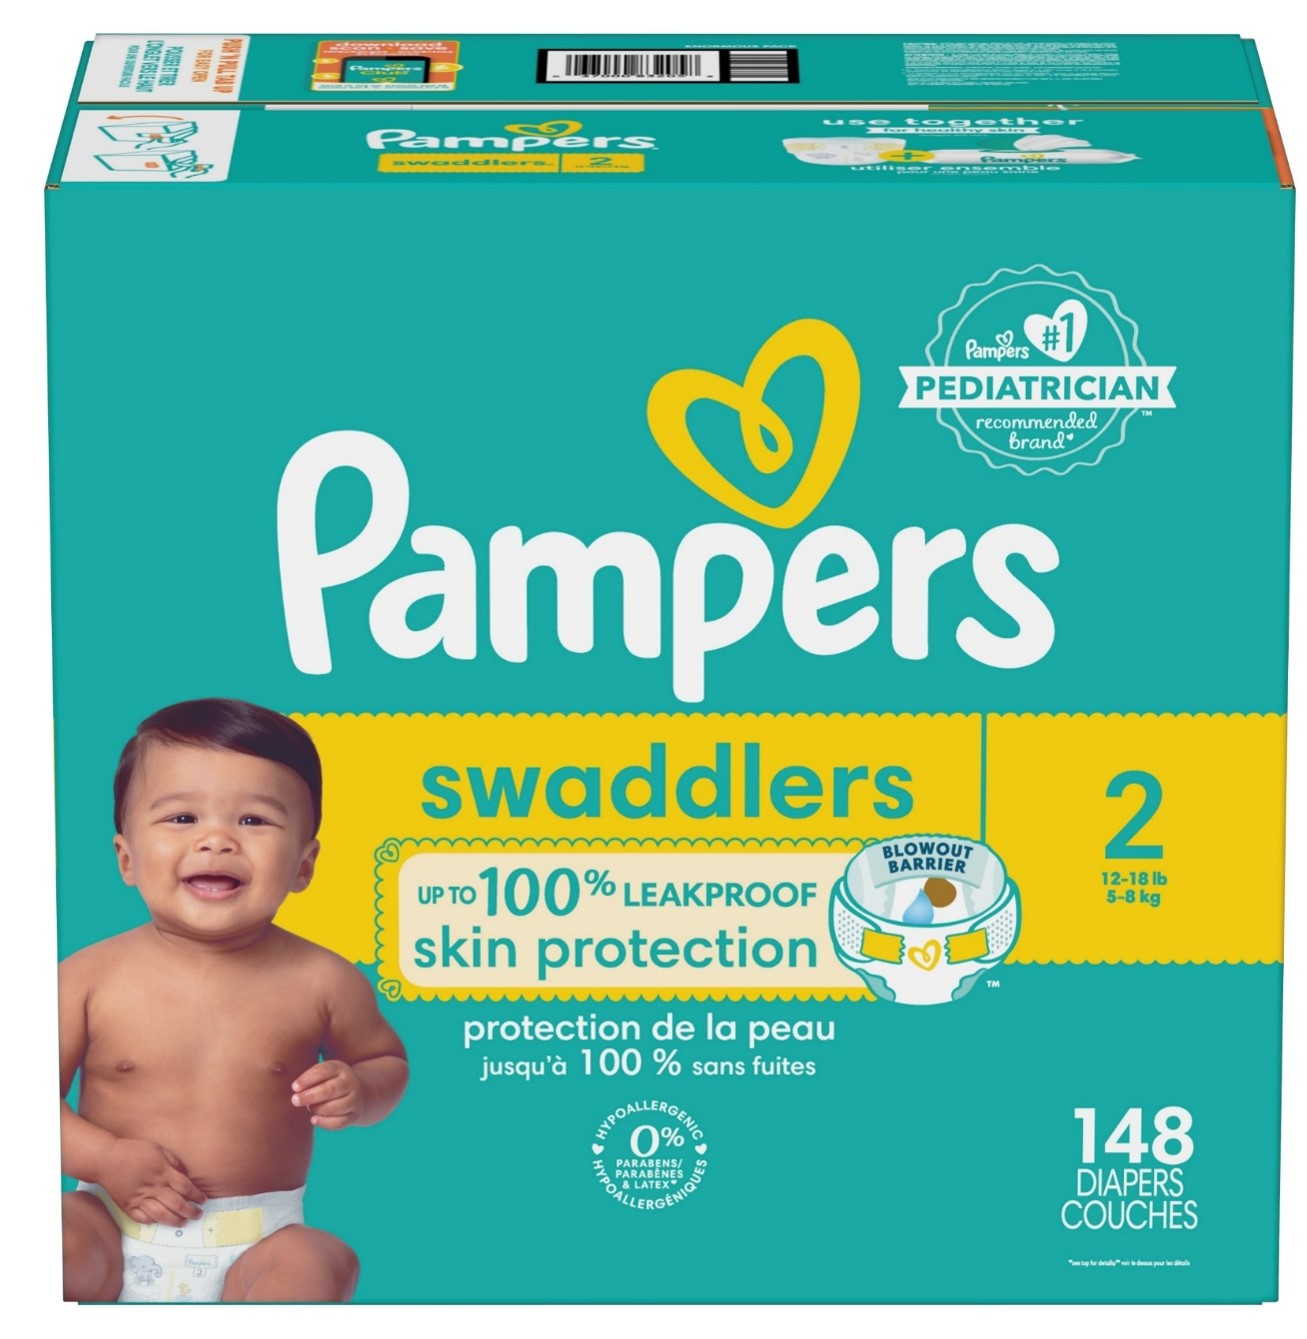 Introducing Our New Product: Space X Diapers by Softcare